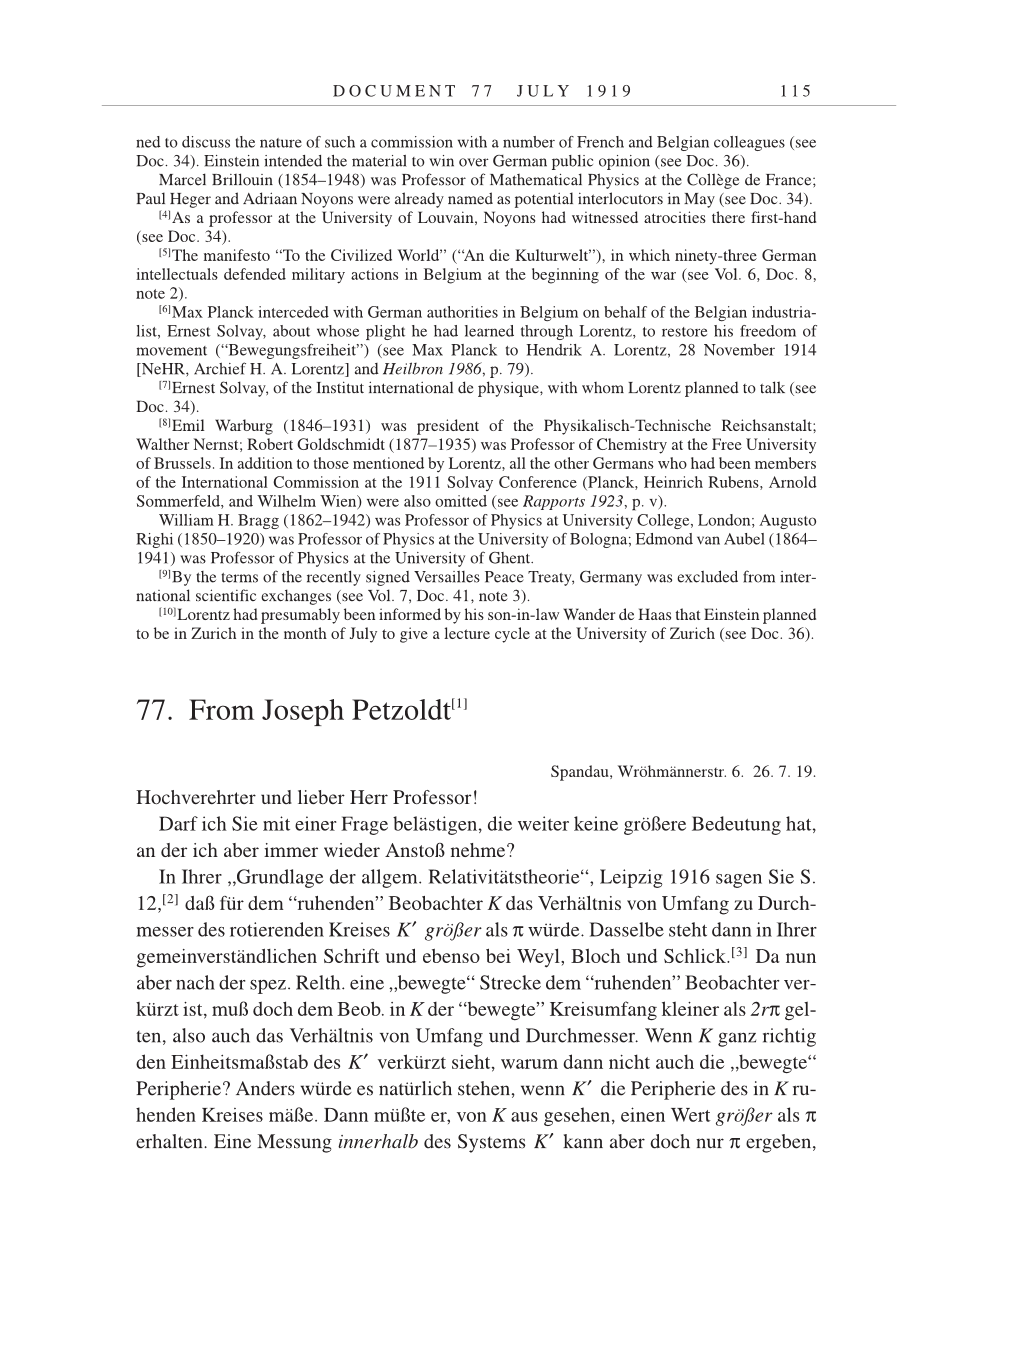 Volume 9: The Berlin Years: Correspondence January 1919-April 1920 page 115